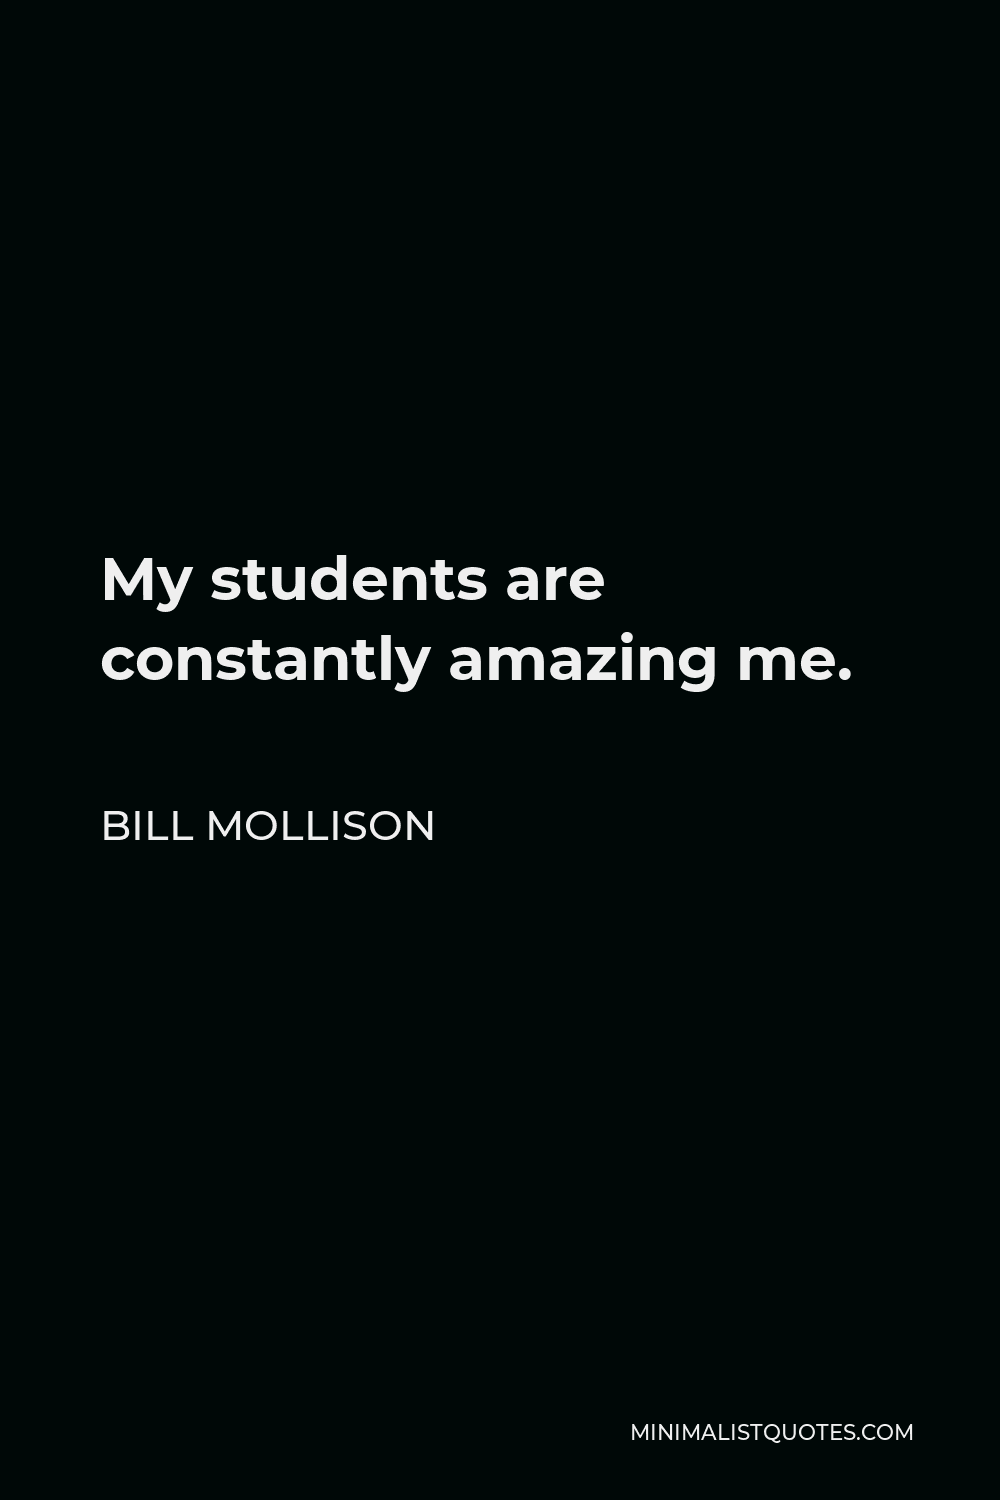 Bill Mollison Quote - My students are constantly amazing me.